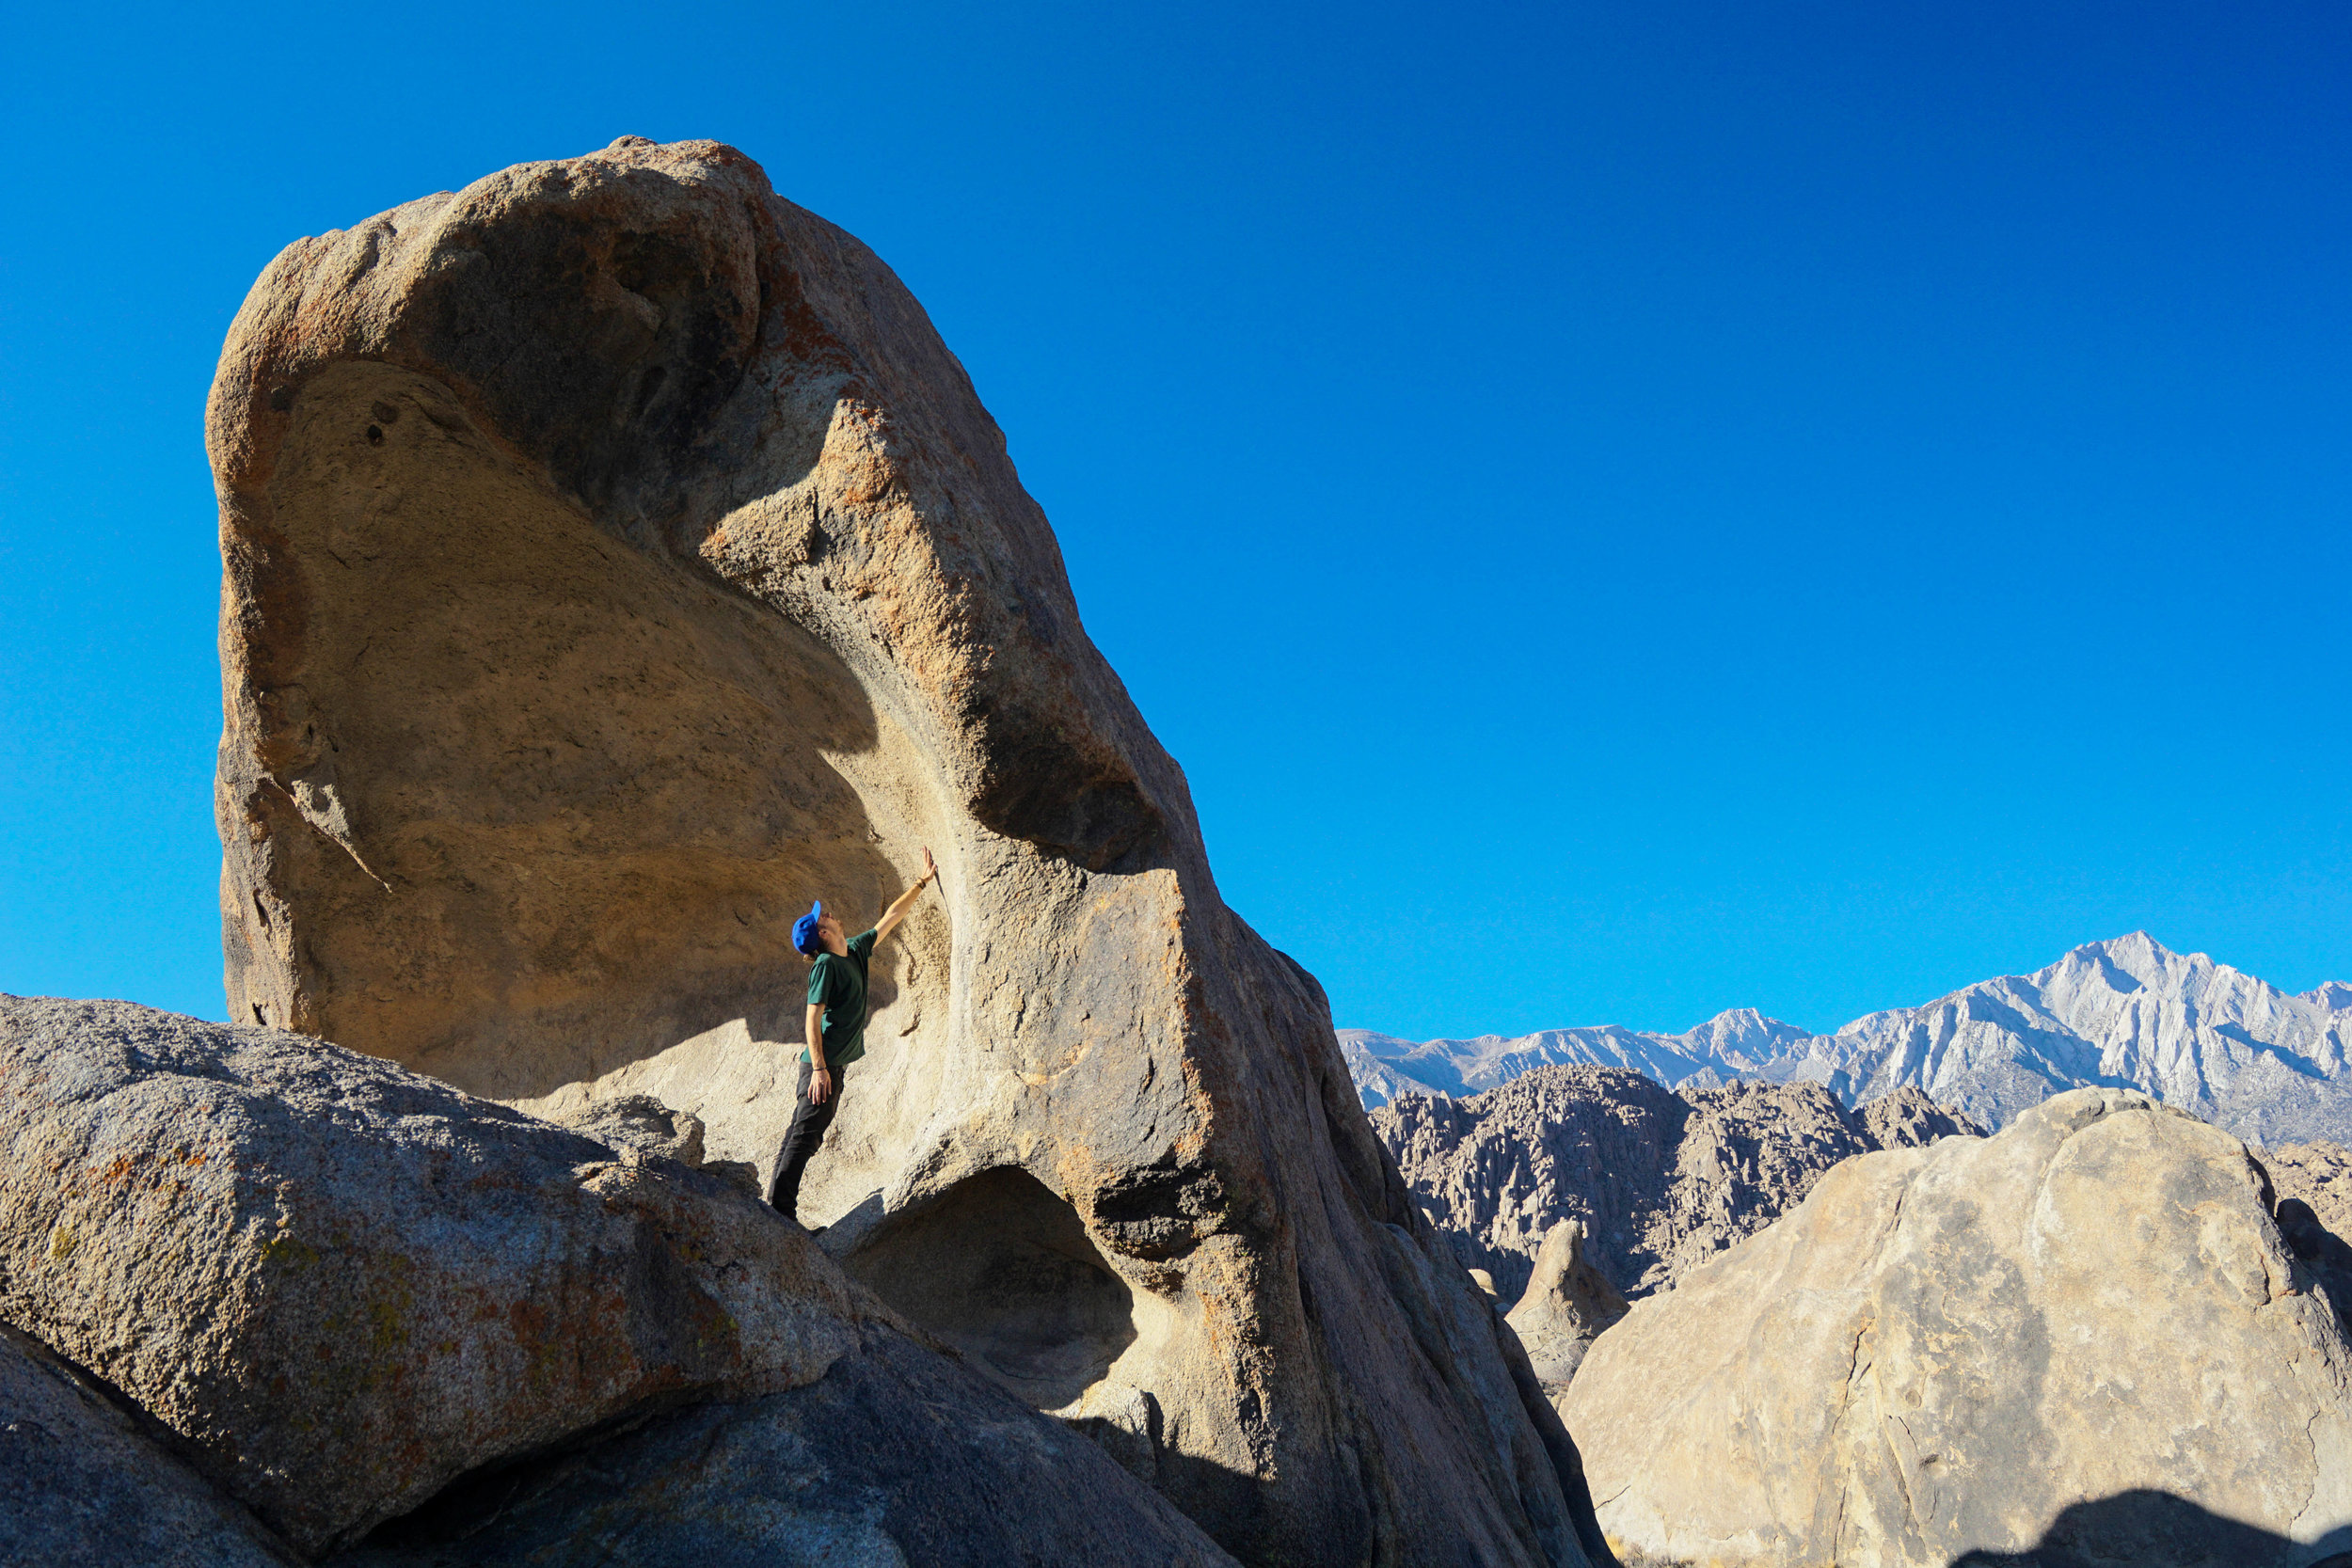 Woke up in Alabama Hills; a time capsule of the Wild West.